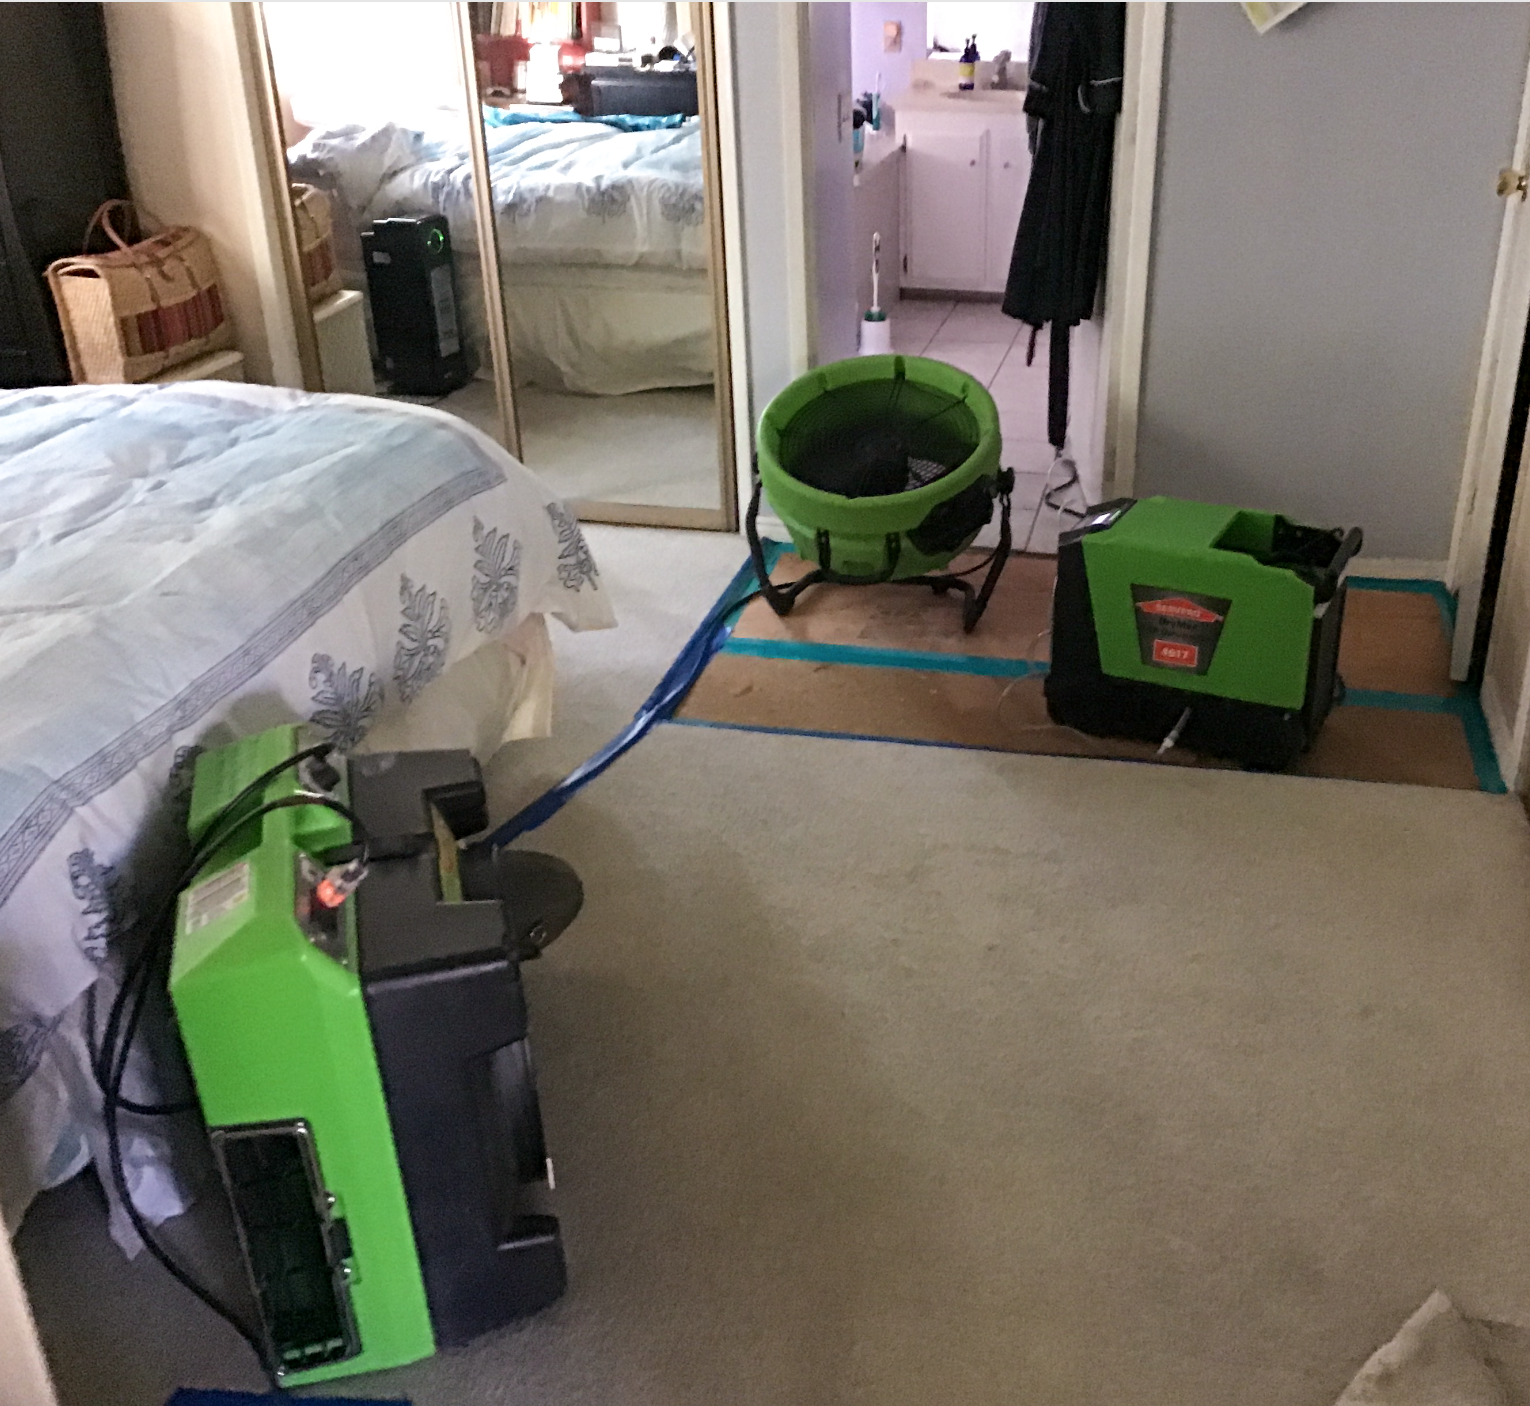 Take a second to review our Water Damage Tips to learn more about the steps you can take after a water loss while you wait for our SERVPRO of Santa Barbara team to arrive!